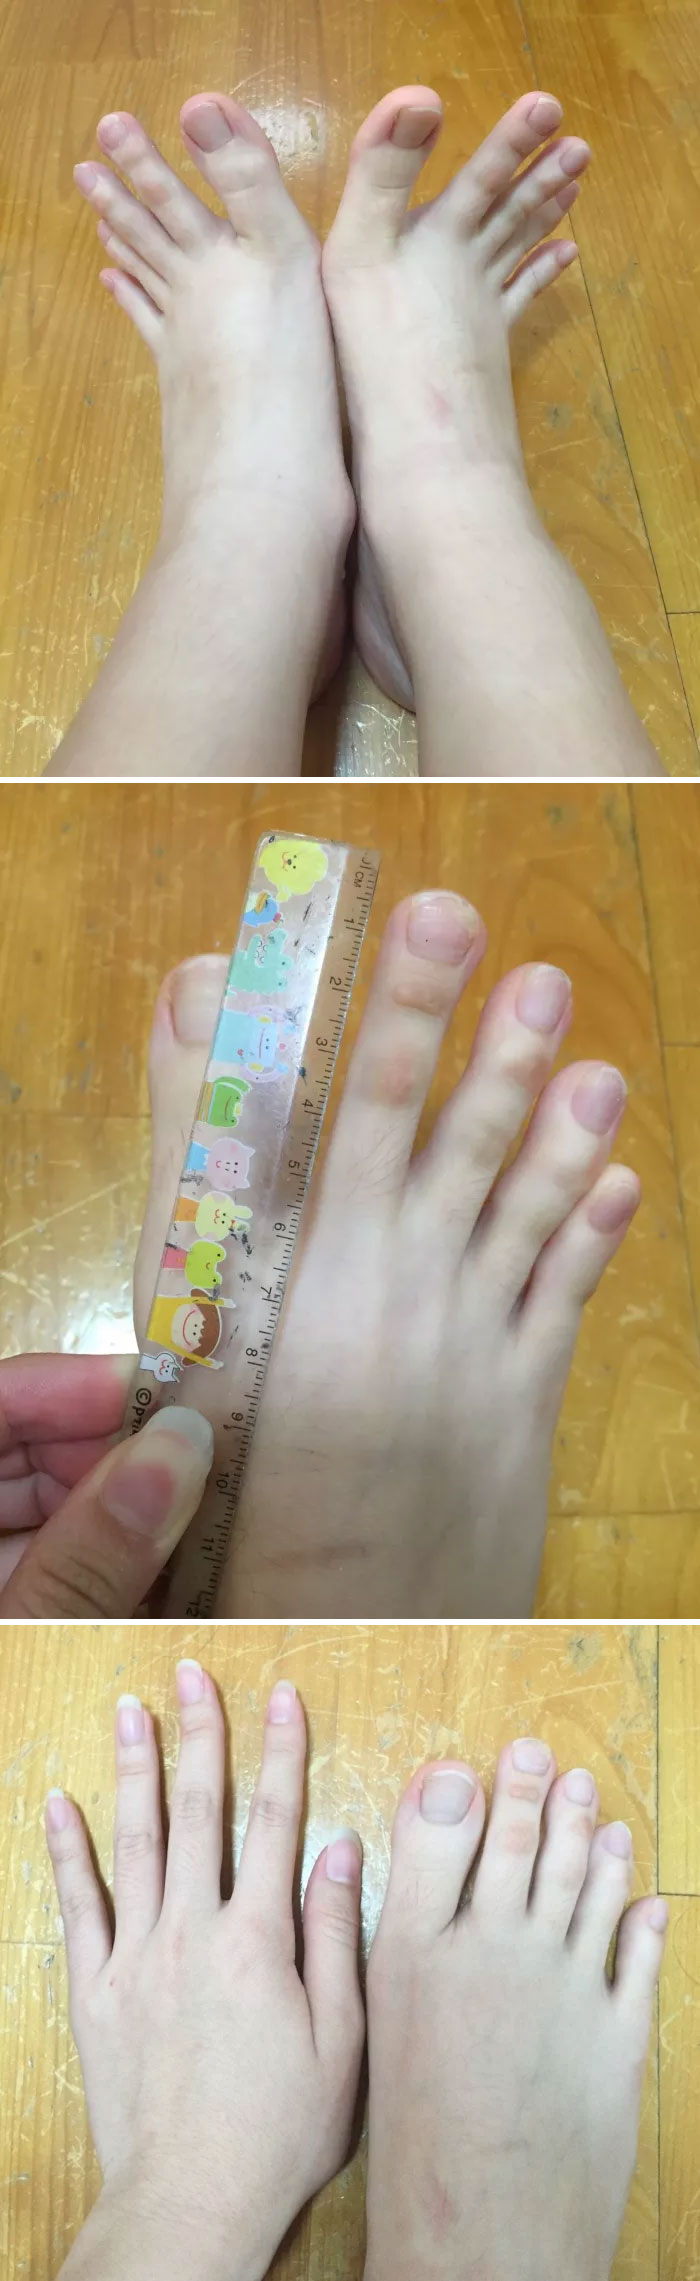 My Height Is Not High, Only 151cm, But My Toes Are Inexplicably Long